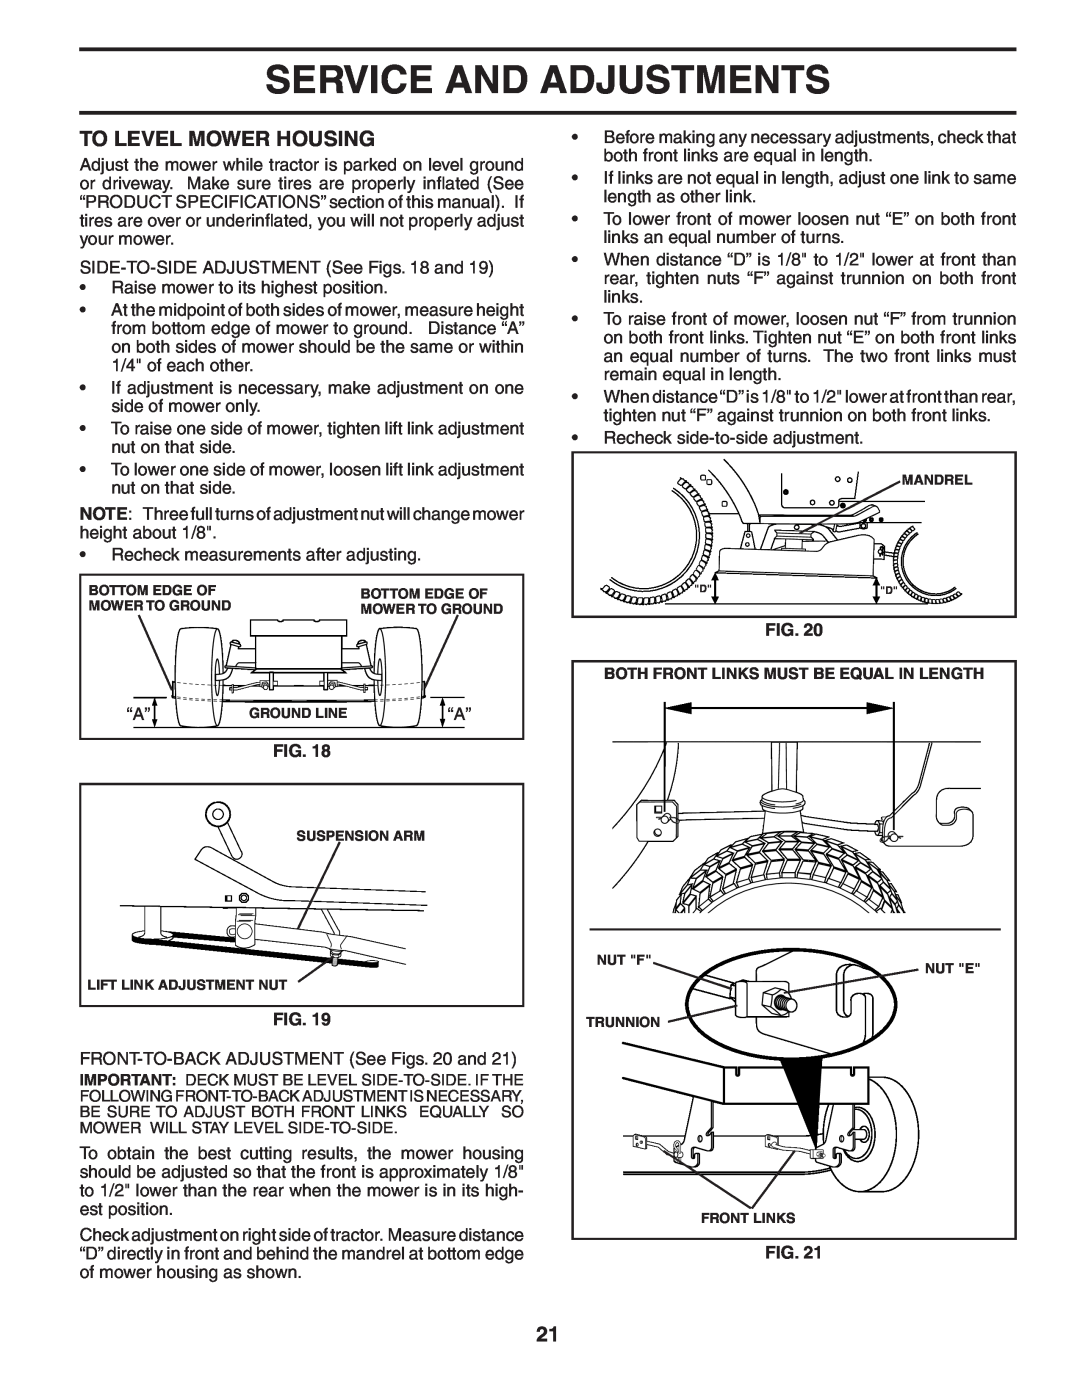 Poulan 188781 owner manual To Level Mower Housing, Service And Adjustments, Both Front Links Must Be Equal In Length 